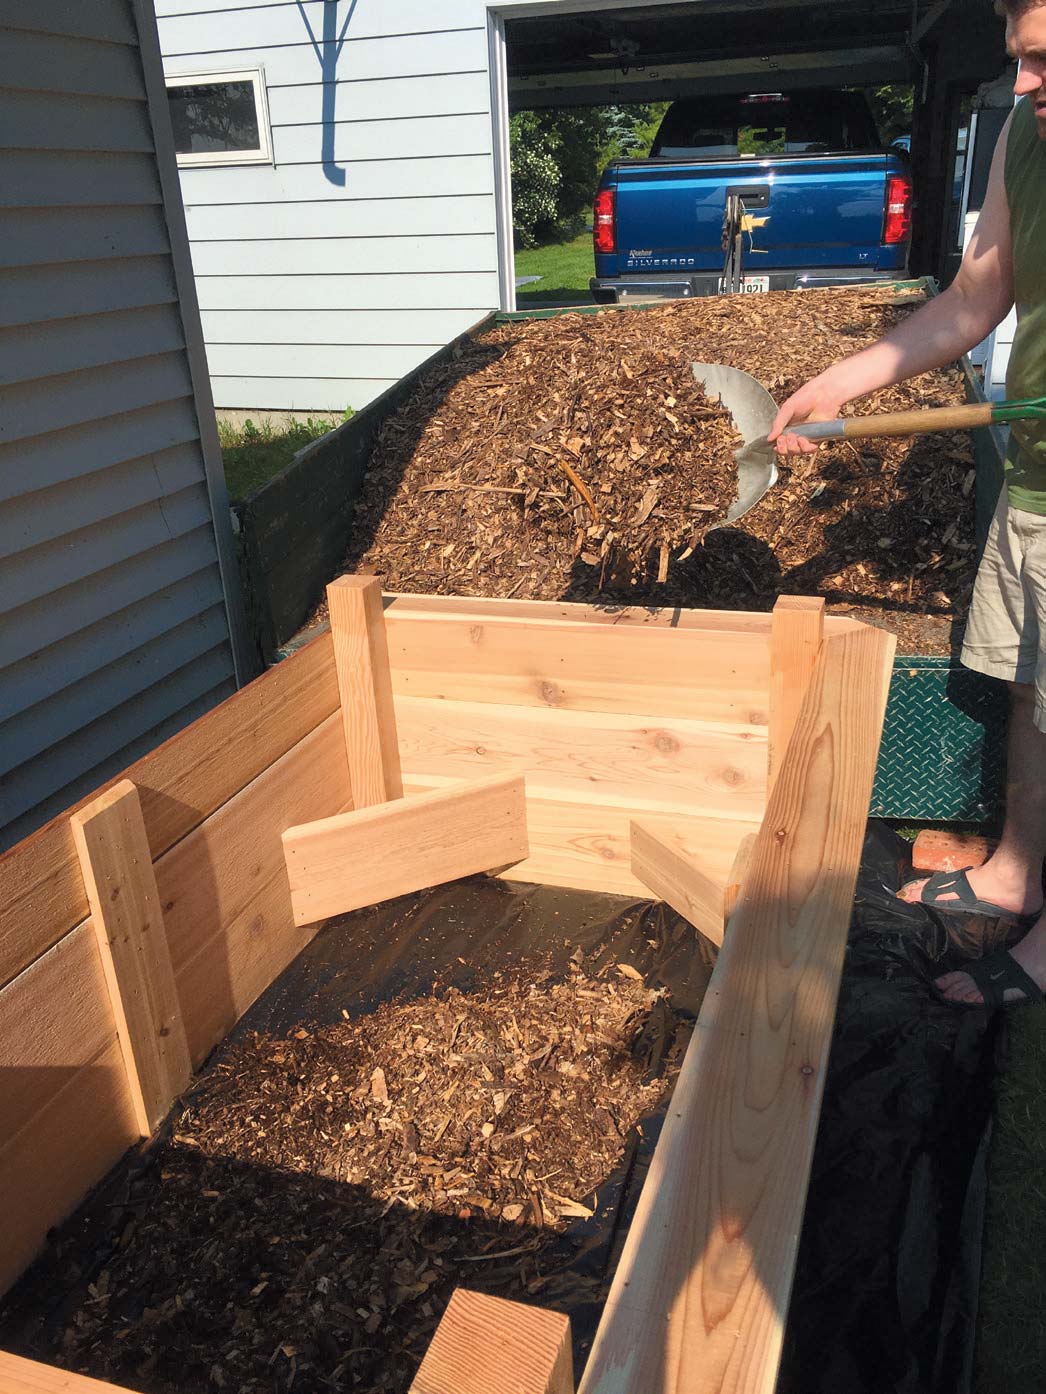 To fill the beds, we used a 3:1 ratio of about one and a half yards of mulch to clean fill dirt.